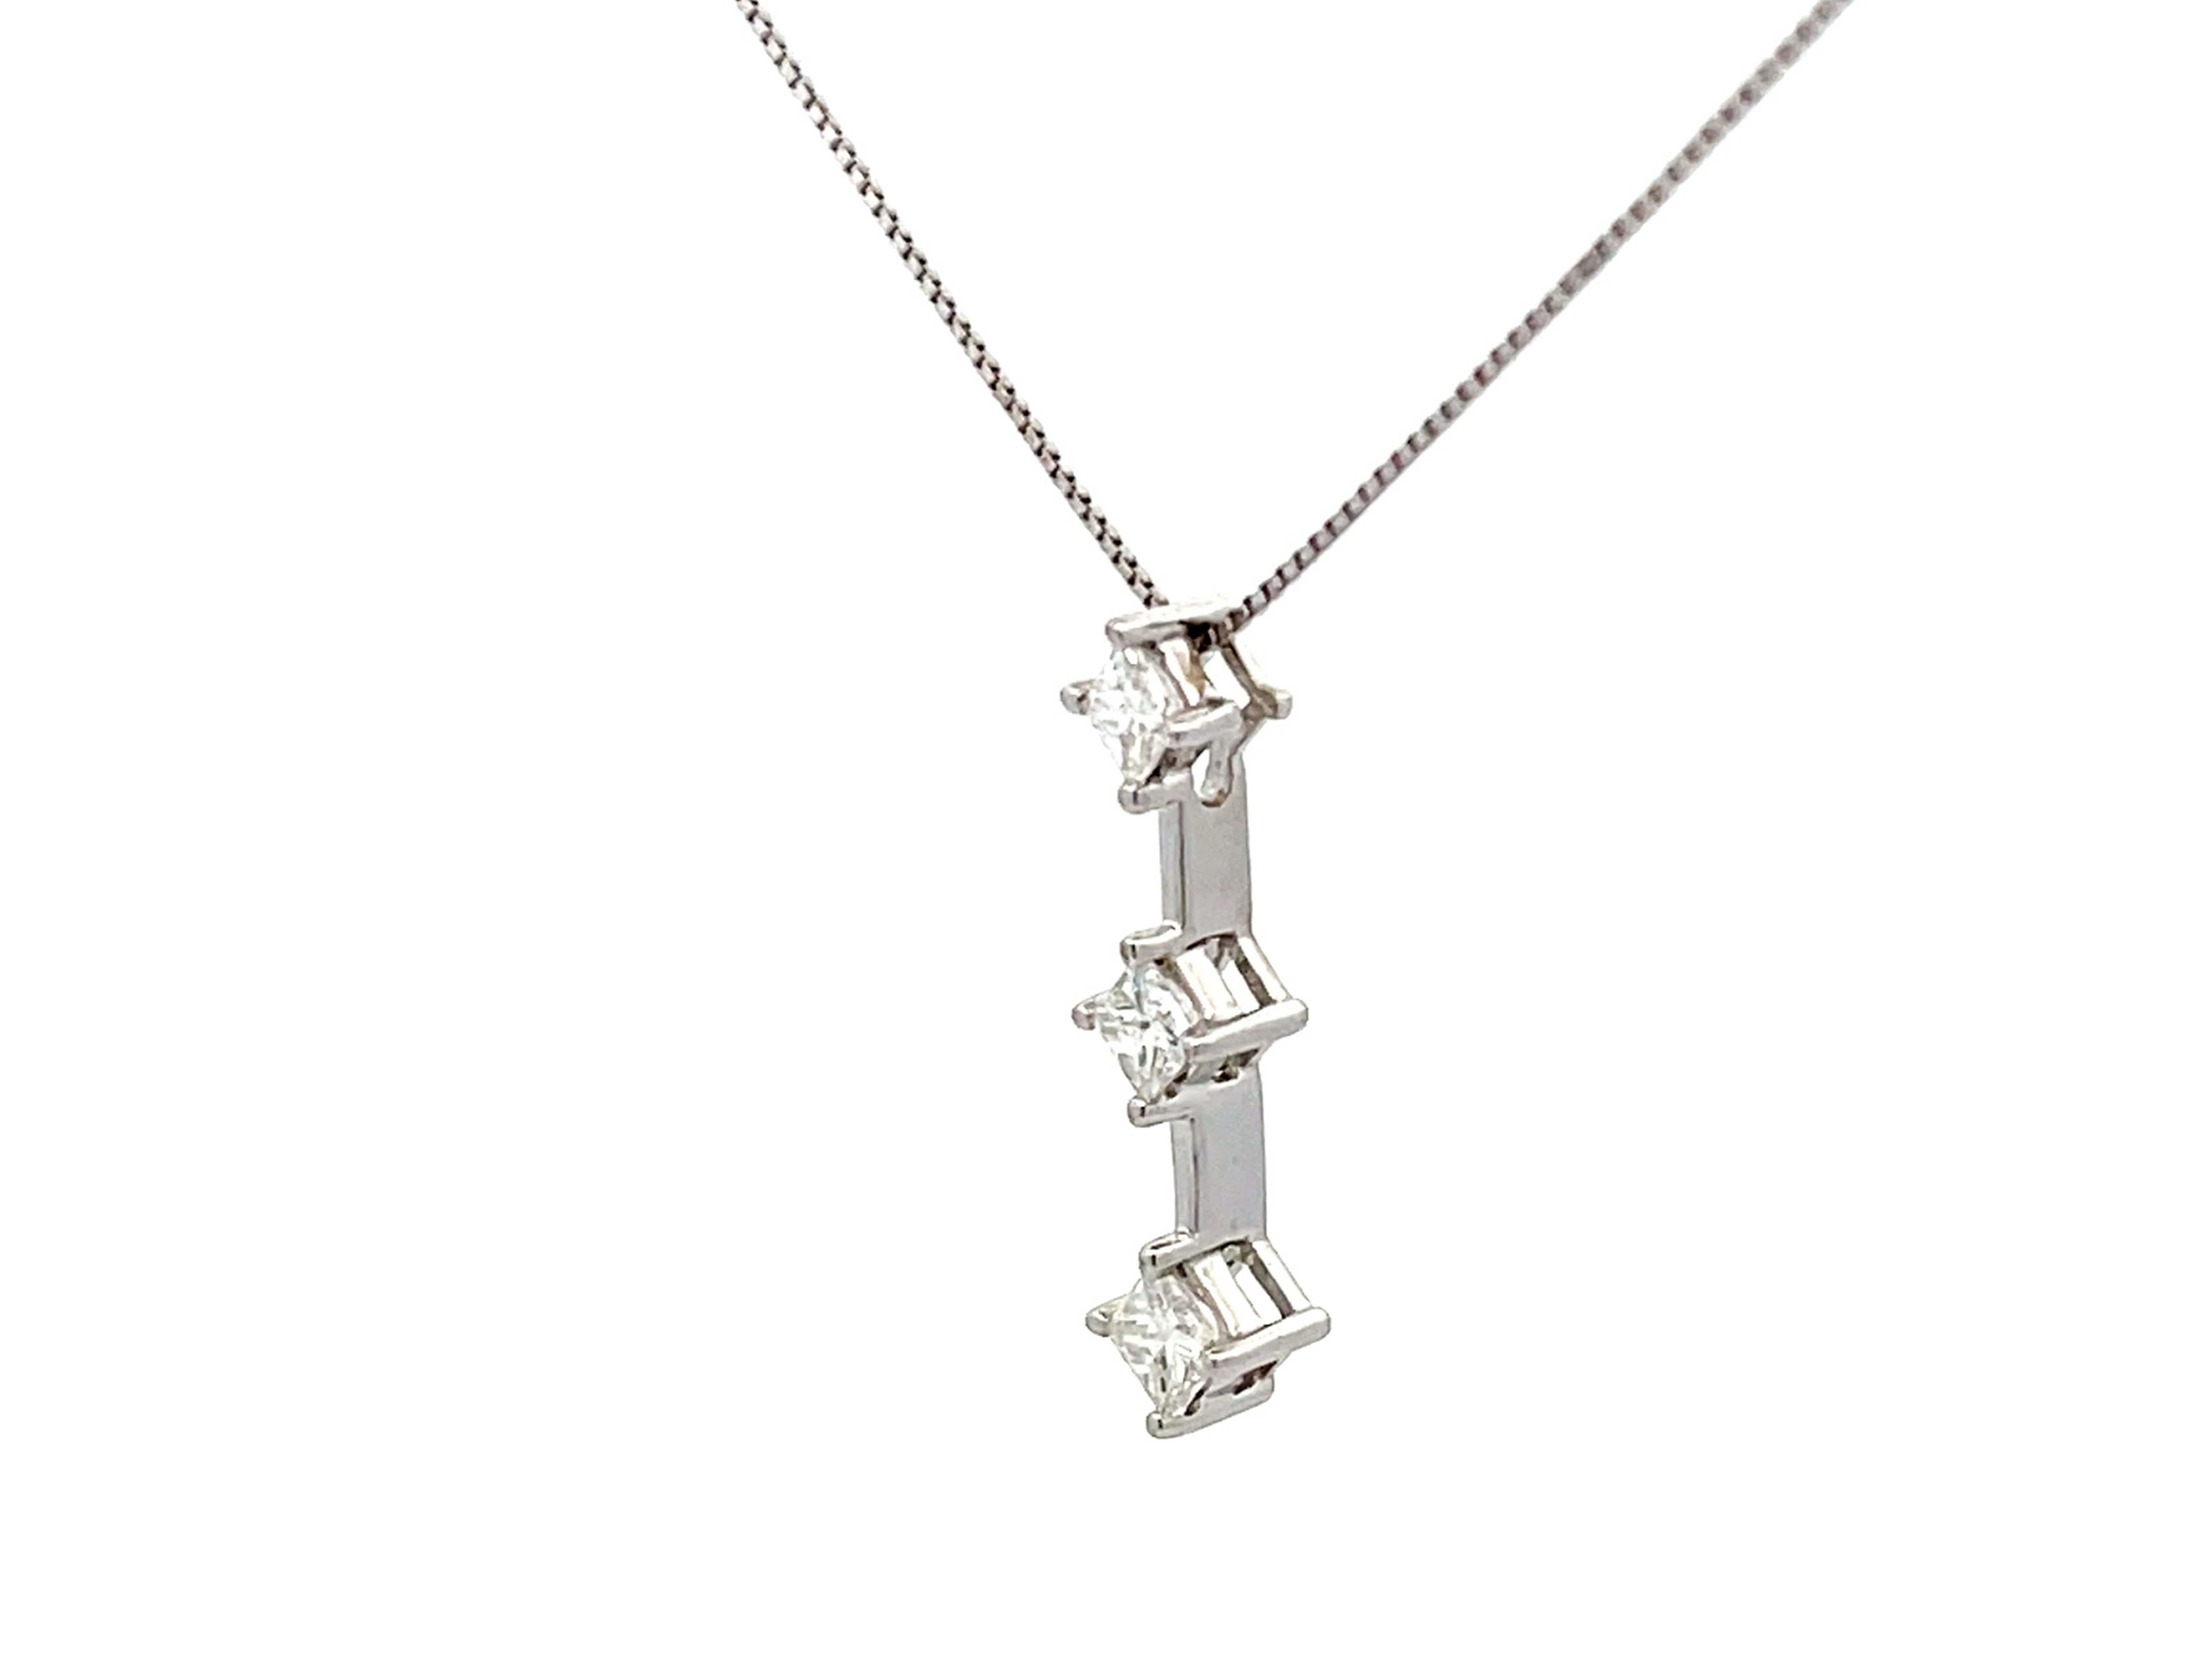 Three Princess Cut Diamond Drop Necklace in 14k White Gold In Excellent Condition For Sale In Honolulu, HI